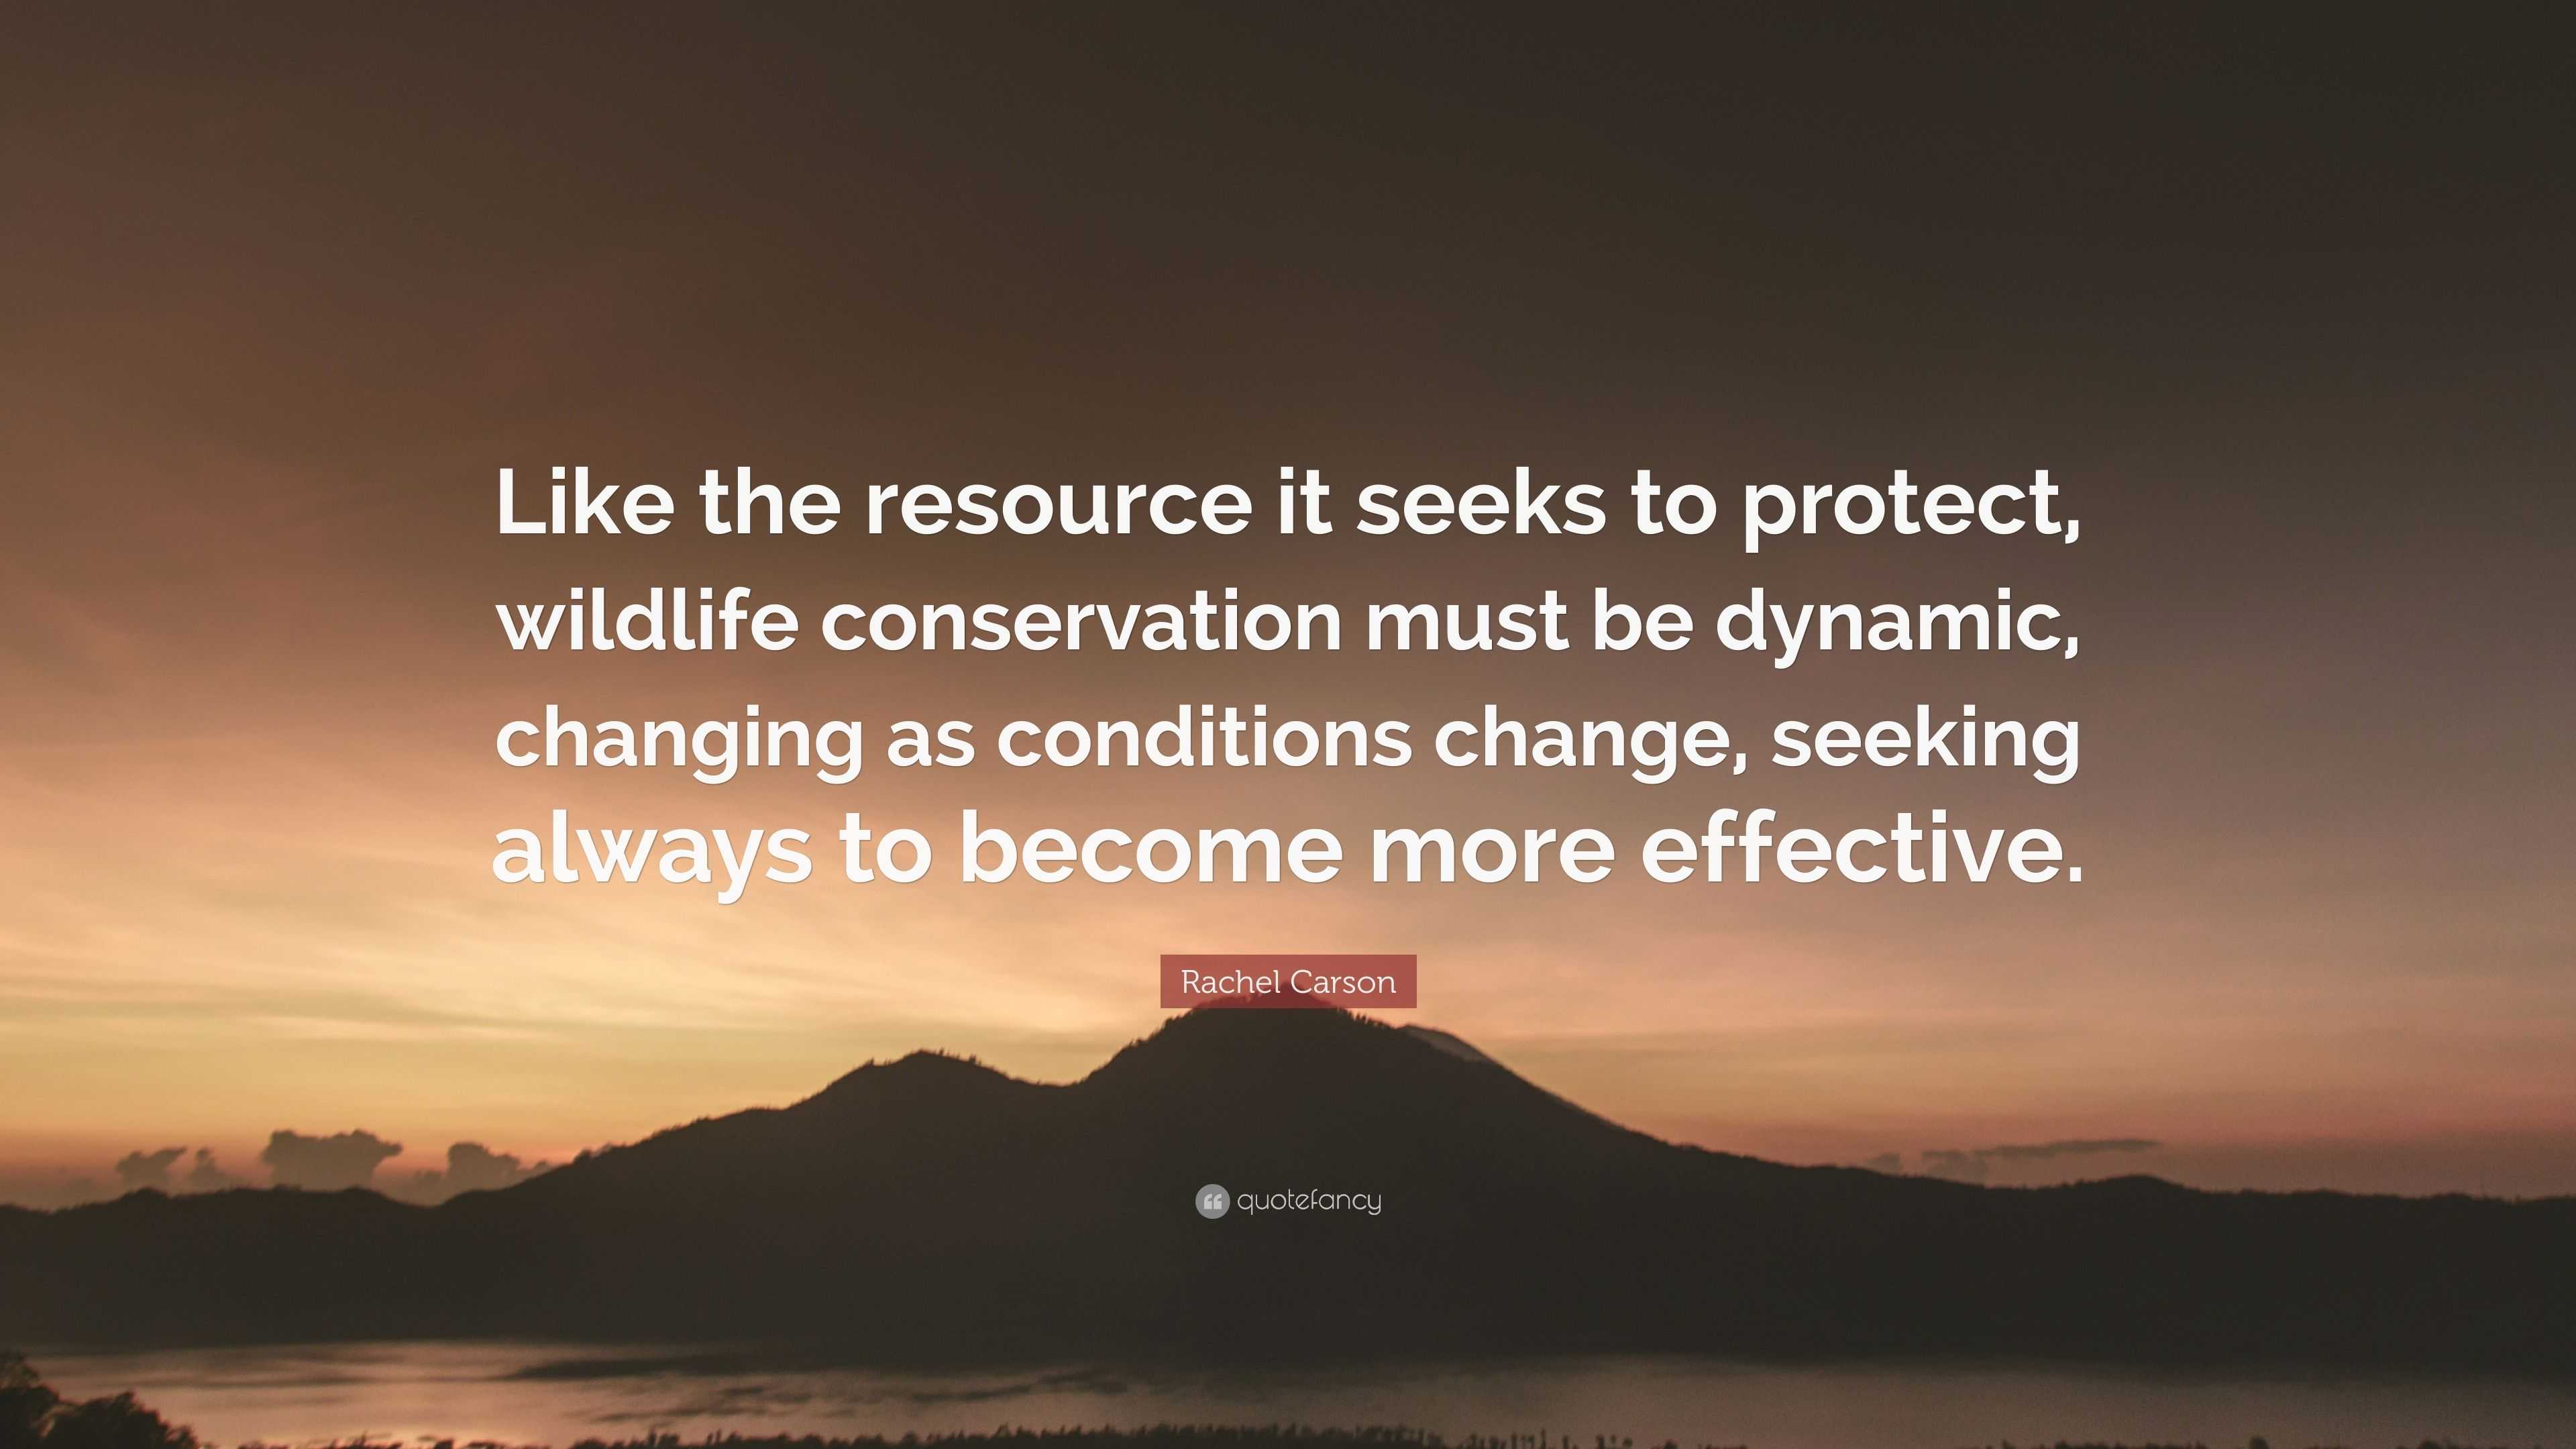 Rachel Carson Quote: “Like the resource it seeks to protect, wildlife